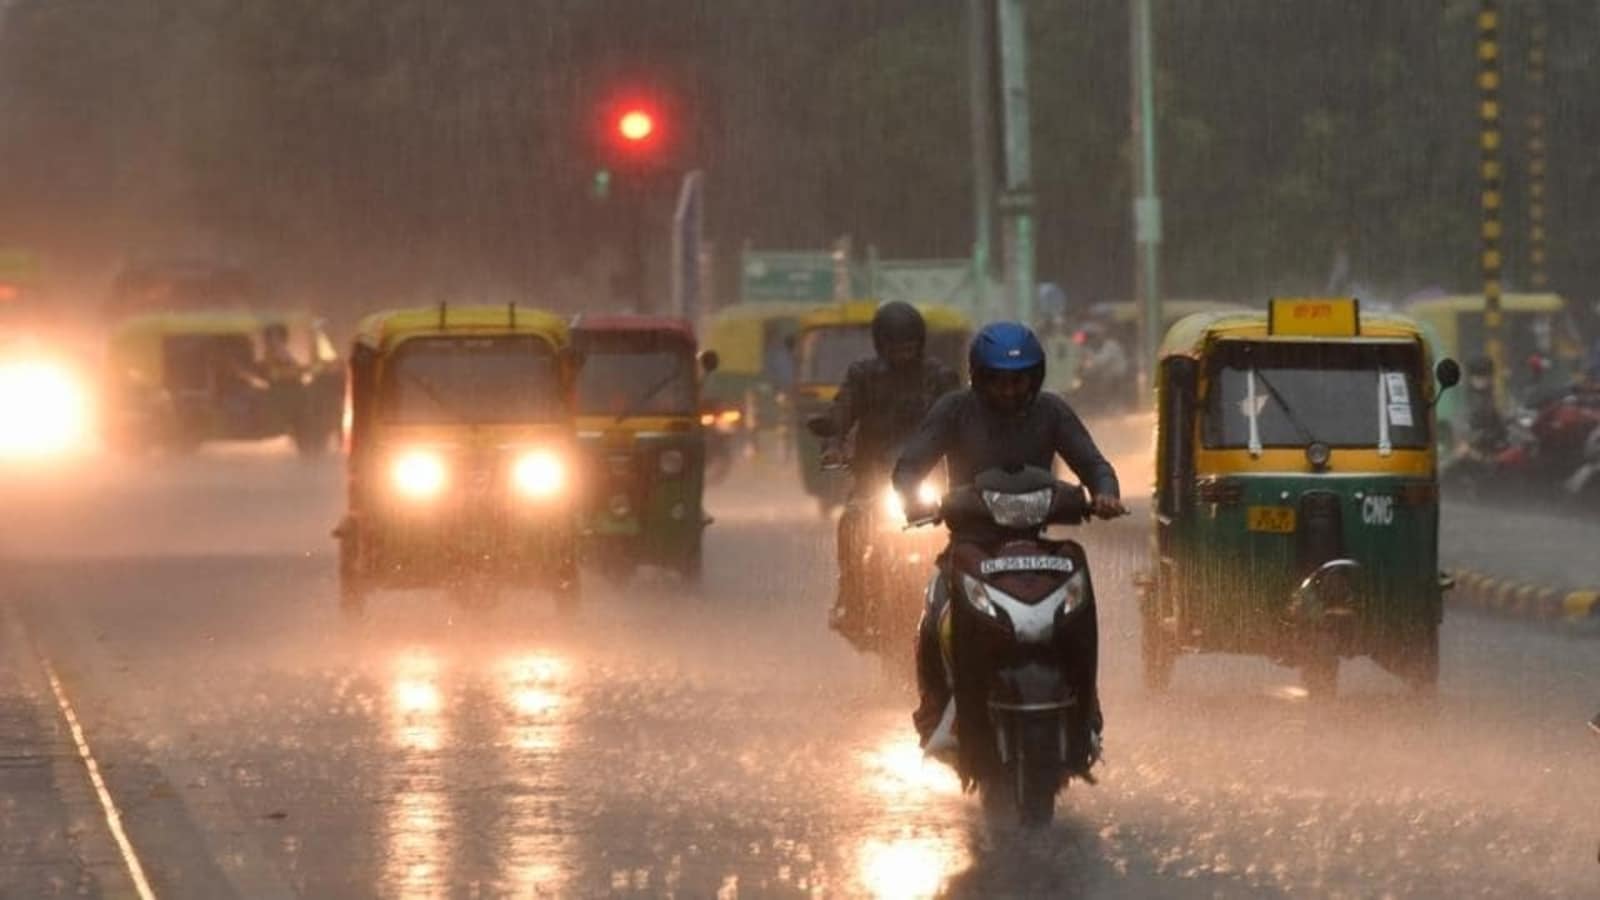 Delhi-NCR rains are here and Twitter is filled with photos, videos and reactions